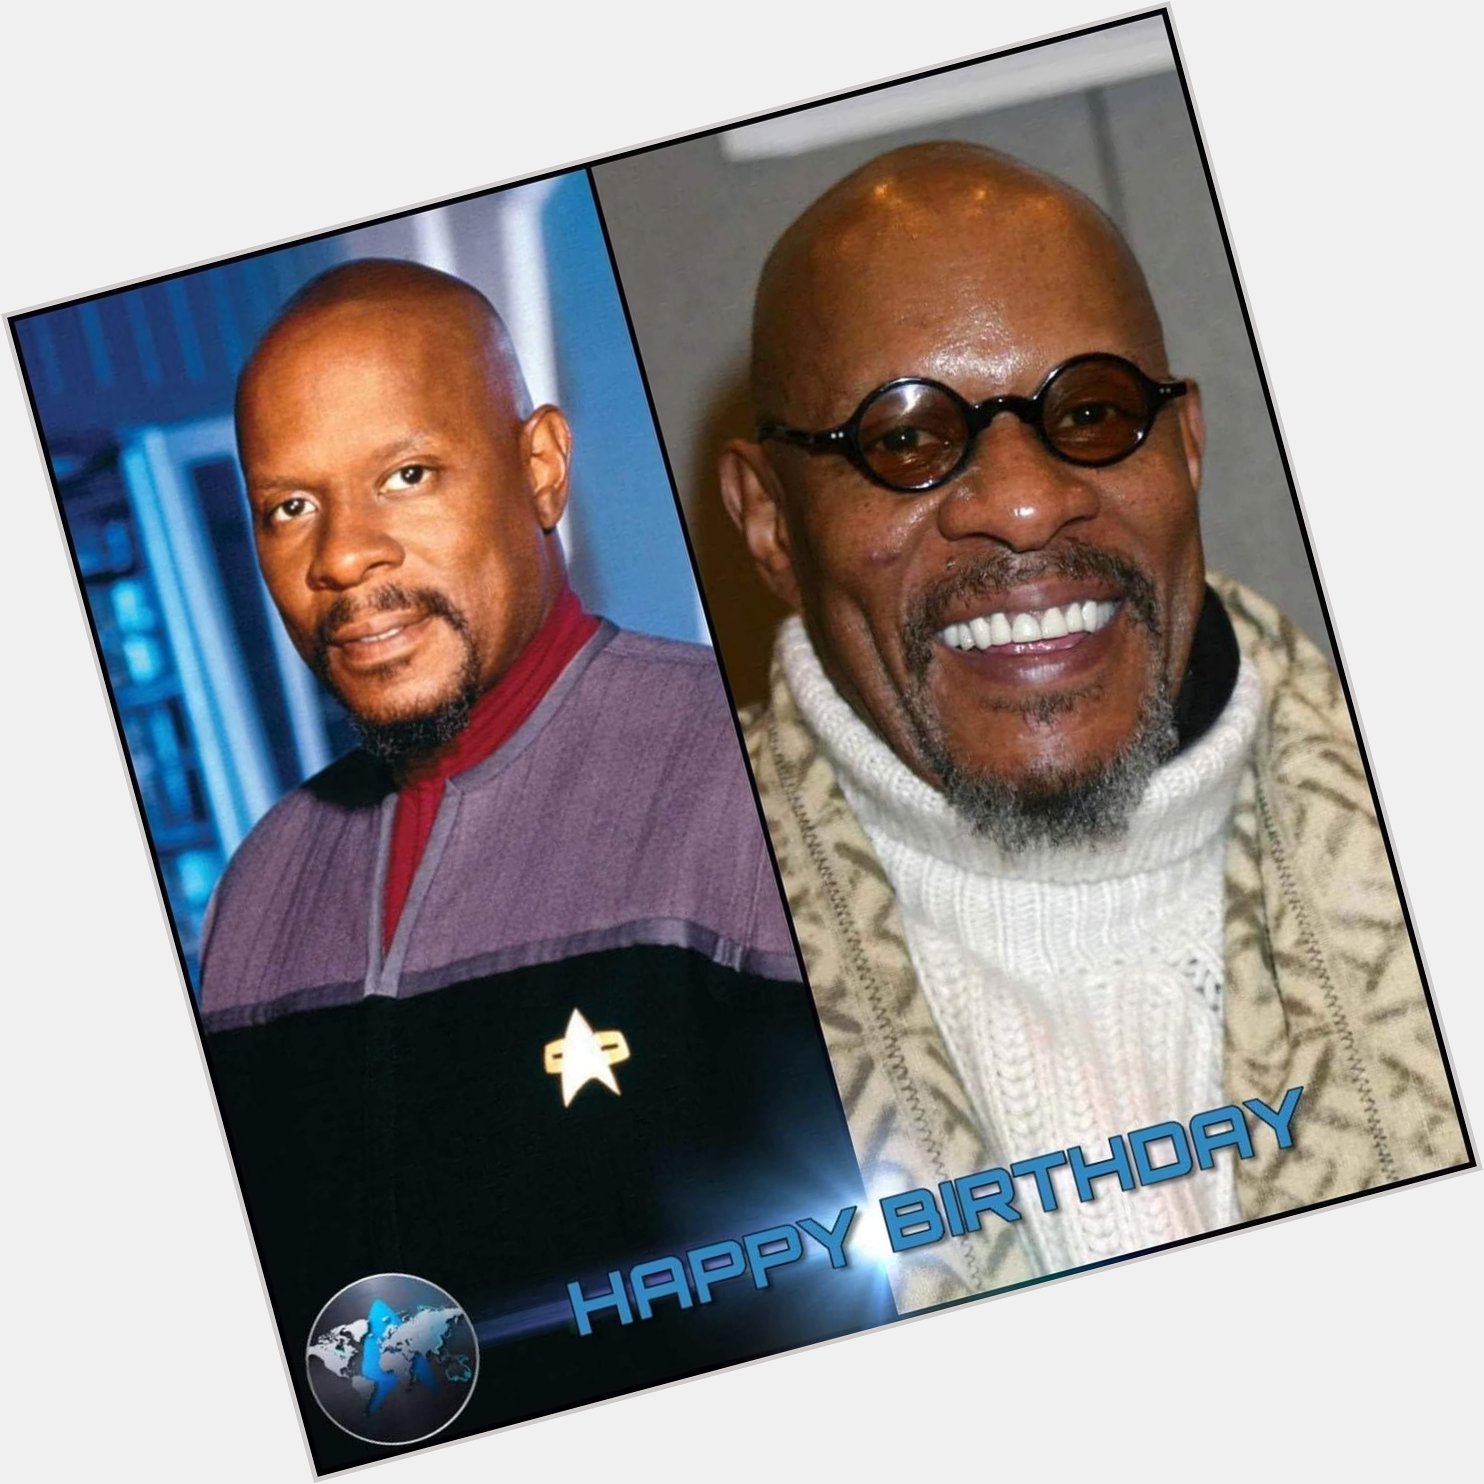 Happy birthday to Avery Brooks!   The Sisko. The Emissary. Captain. No other Captain I d rather serve for. 